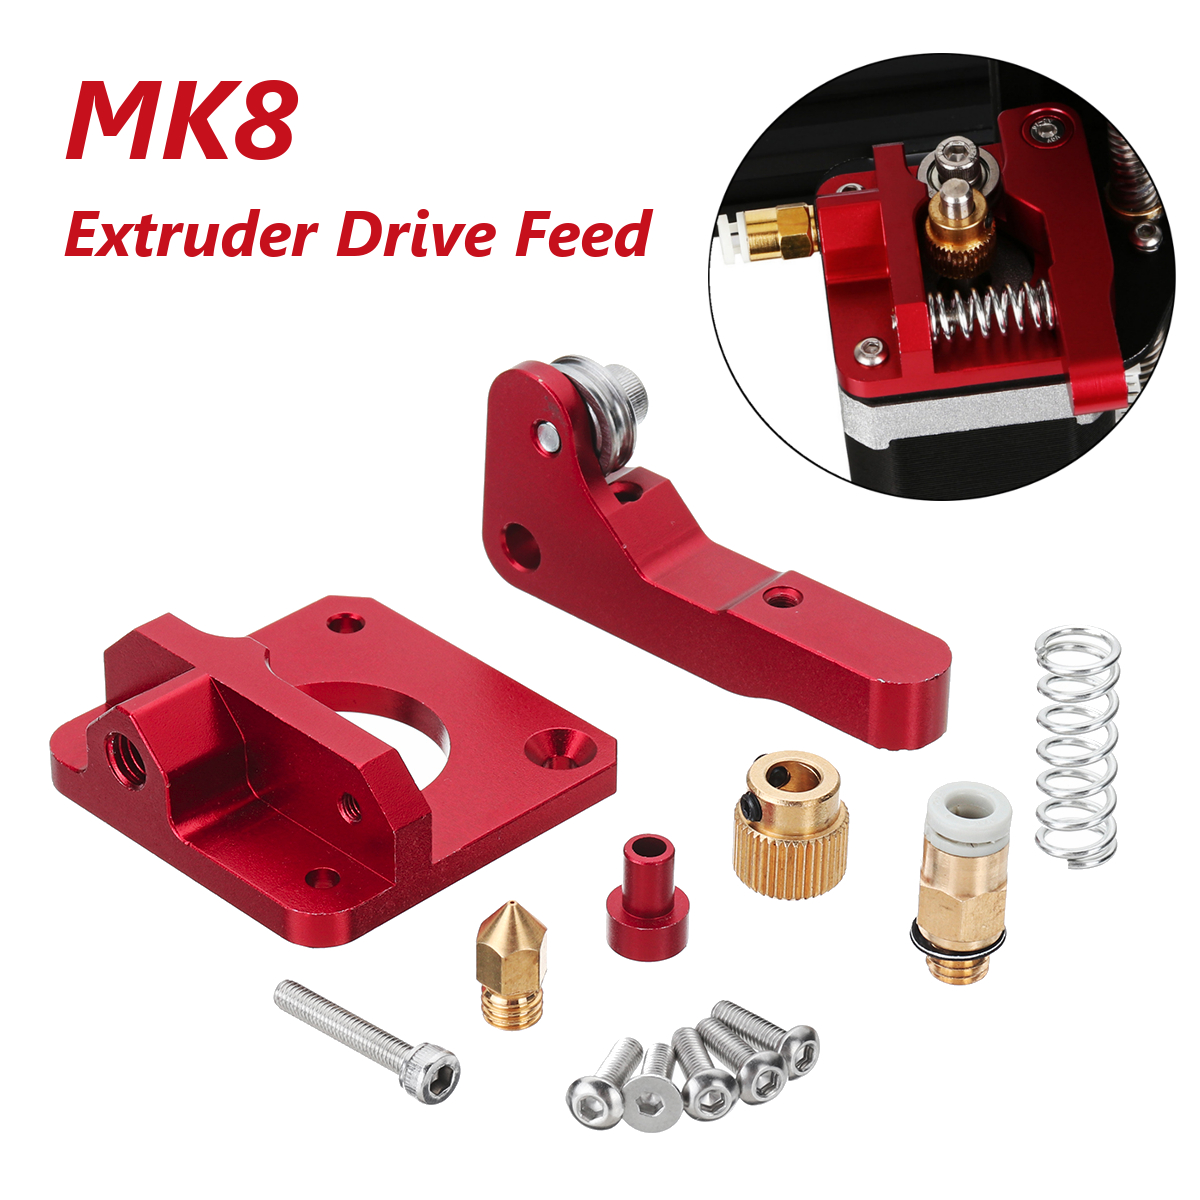 Upgraded Aluminum MK8 Extruder Drive Feed for CR-10 3D Printer Part 13